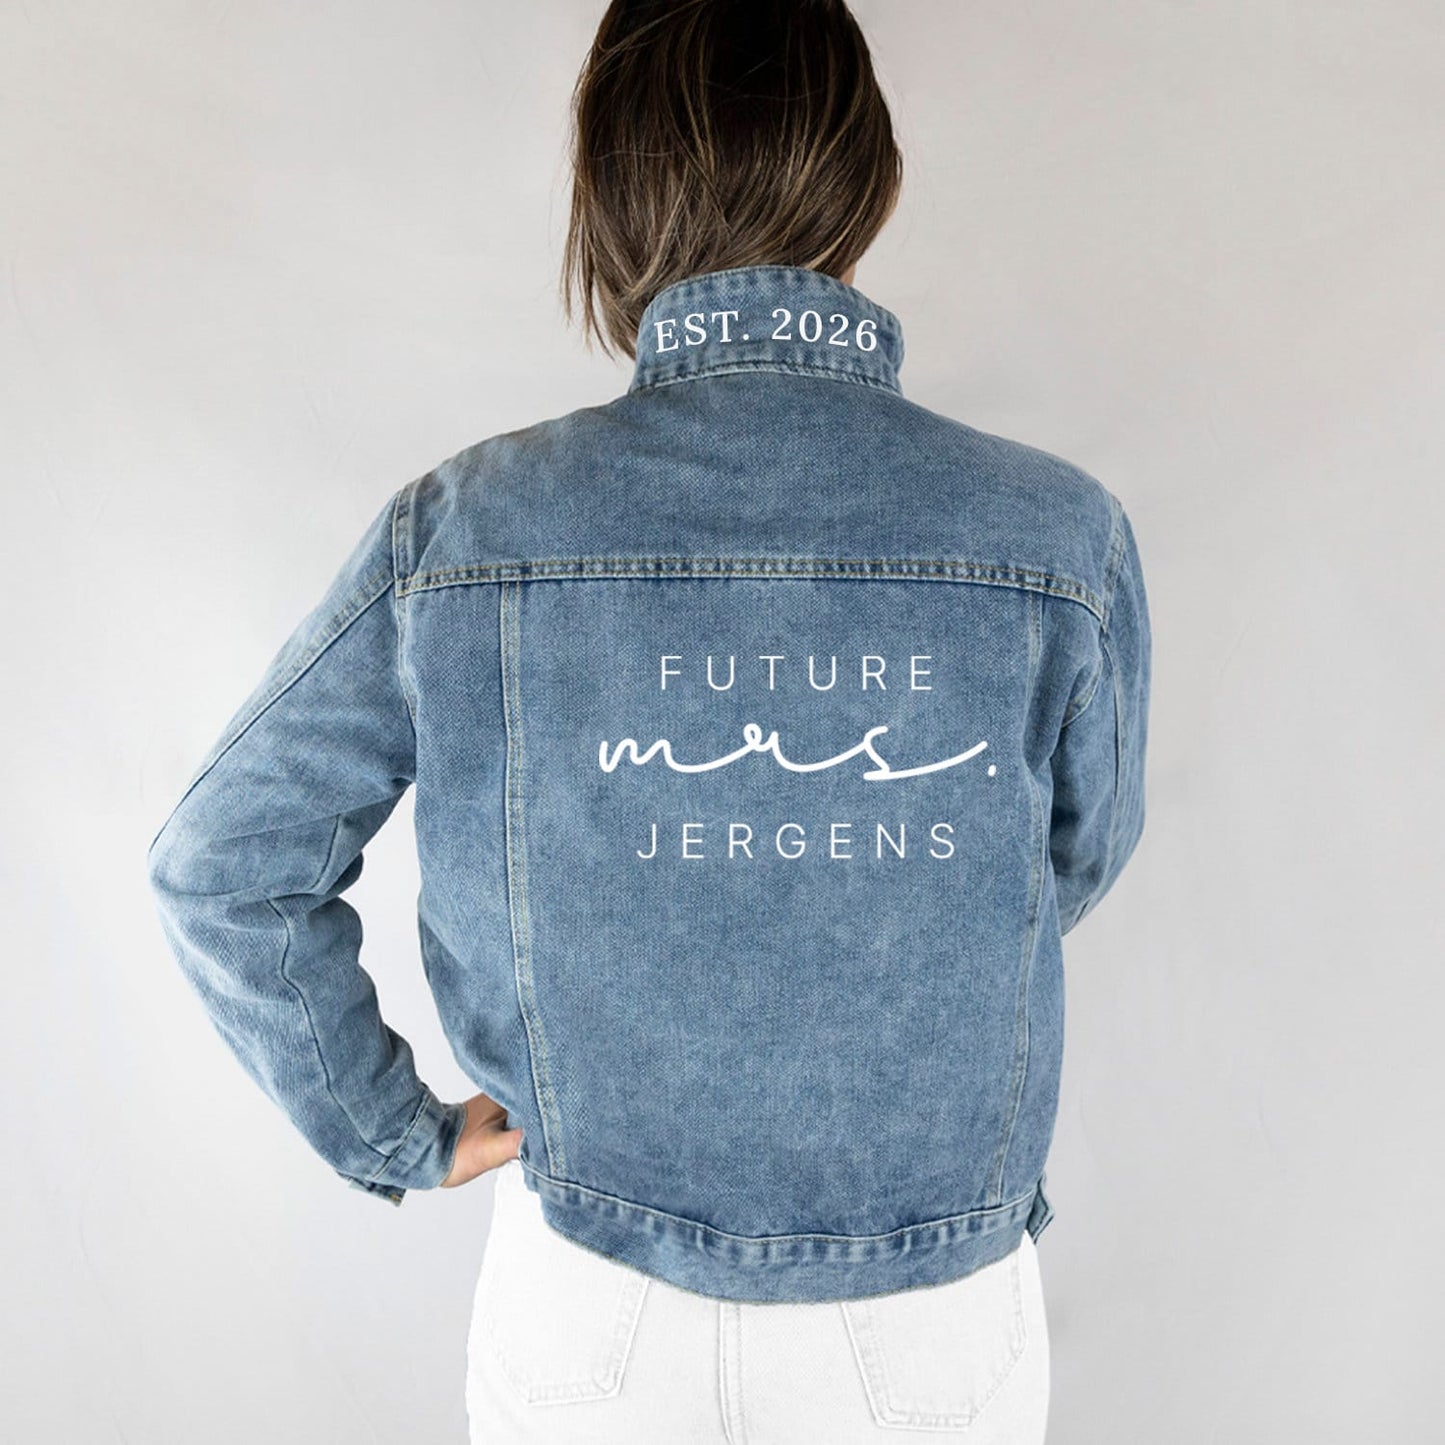 Personalized Jean Jacket for Bride